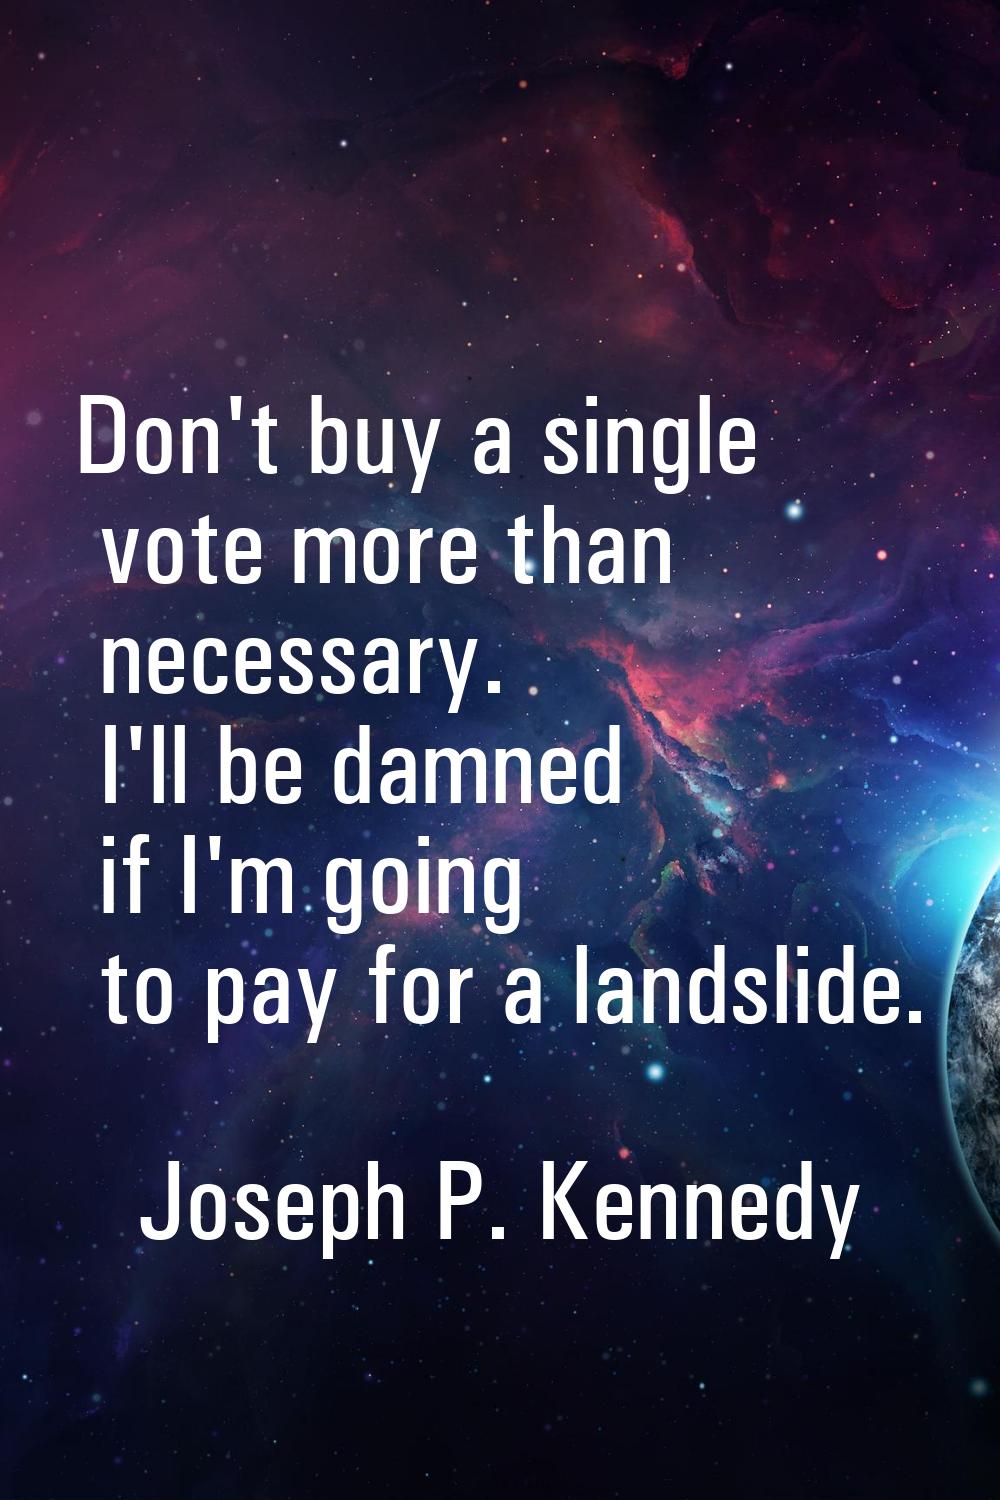 Don't buy a single vote more than necessary. I'll be damned if I'm going to pay for a landslide.